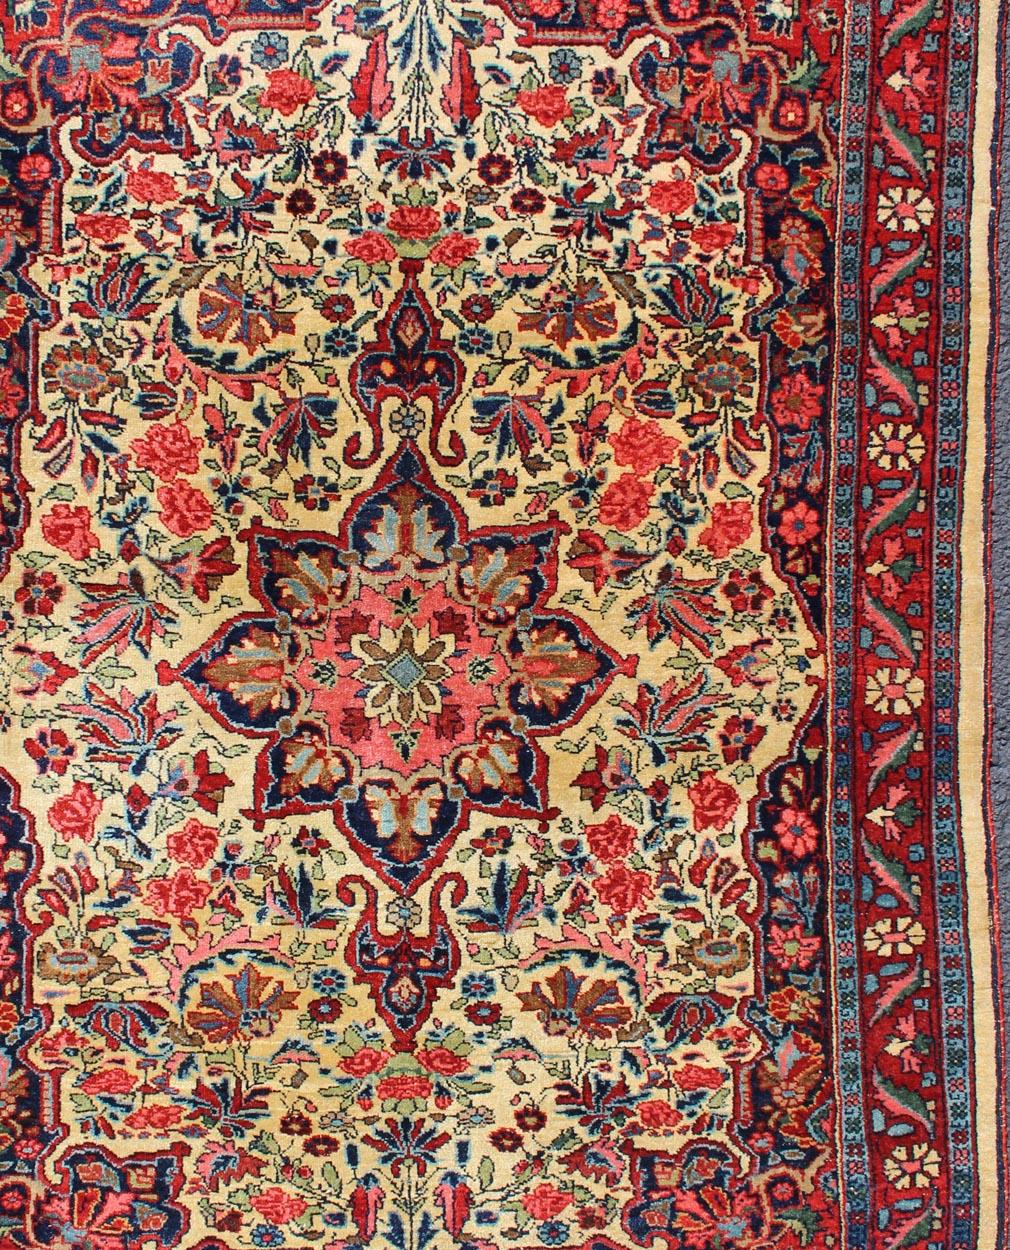 Hand-Knotted Antique Persian Medallion Bidjar Colorful Rug In Ivory, Navy Blue and Red For Sale